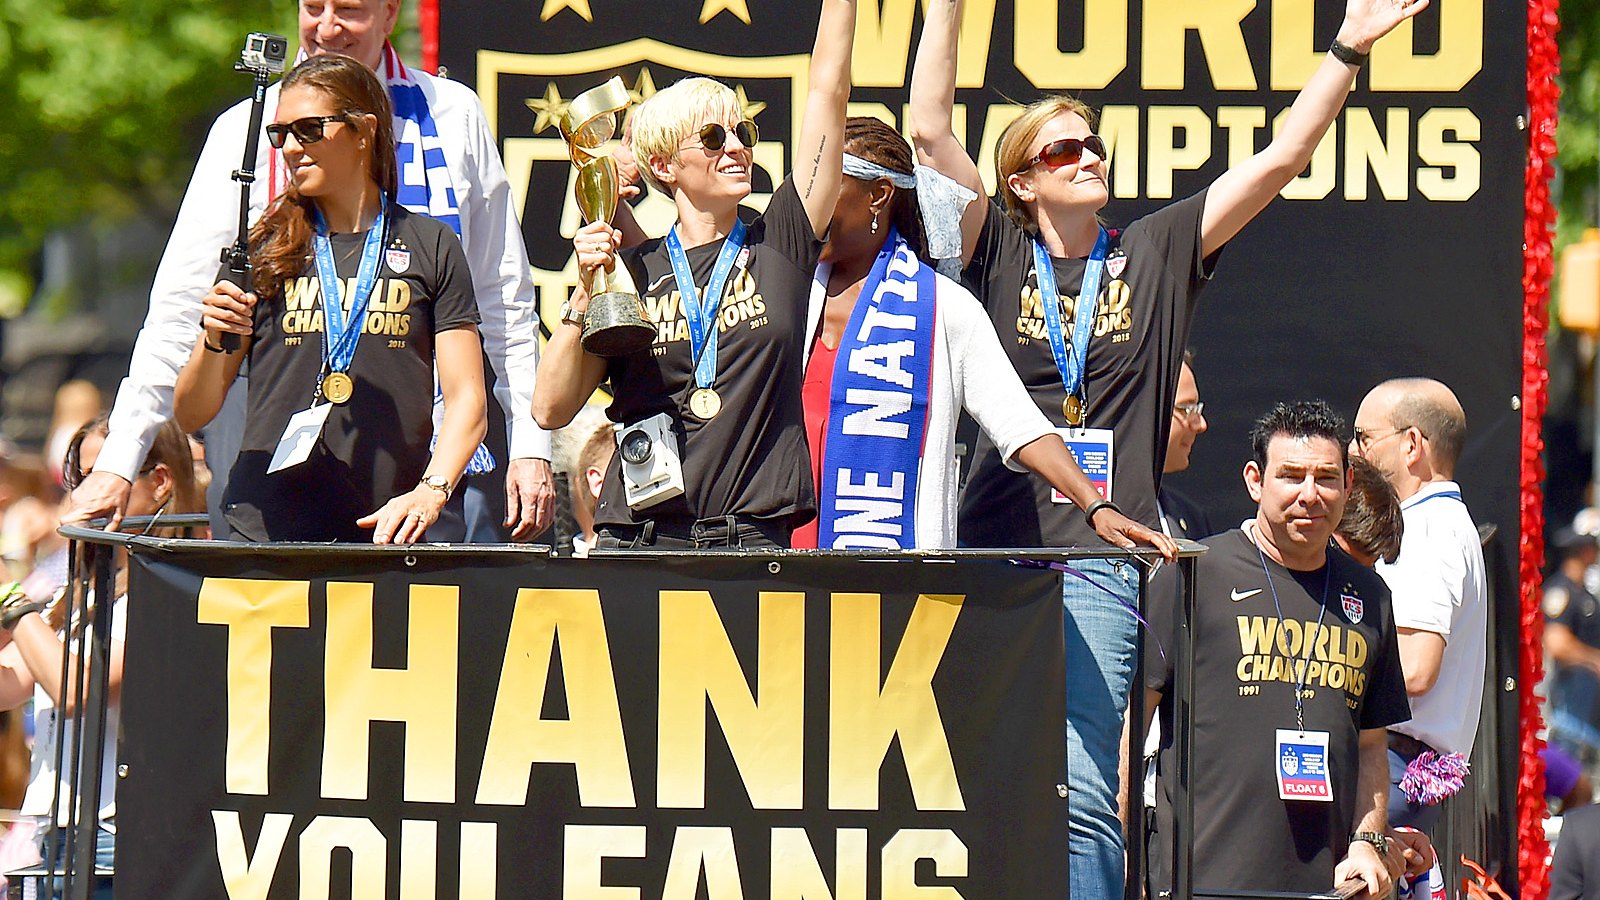 The U.S. Women's soccer team celebrated their World Cup win on July 10